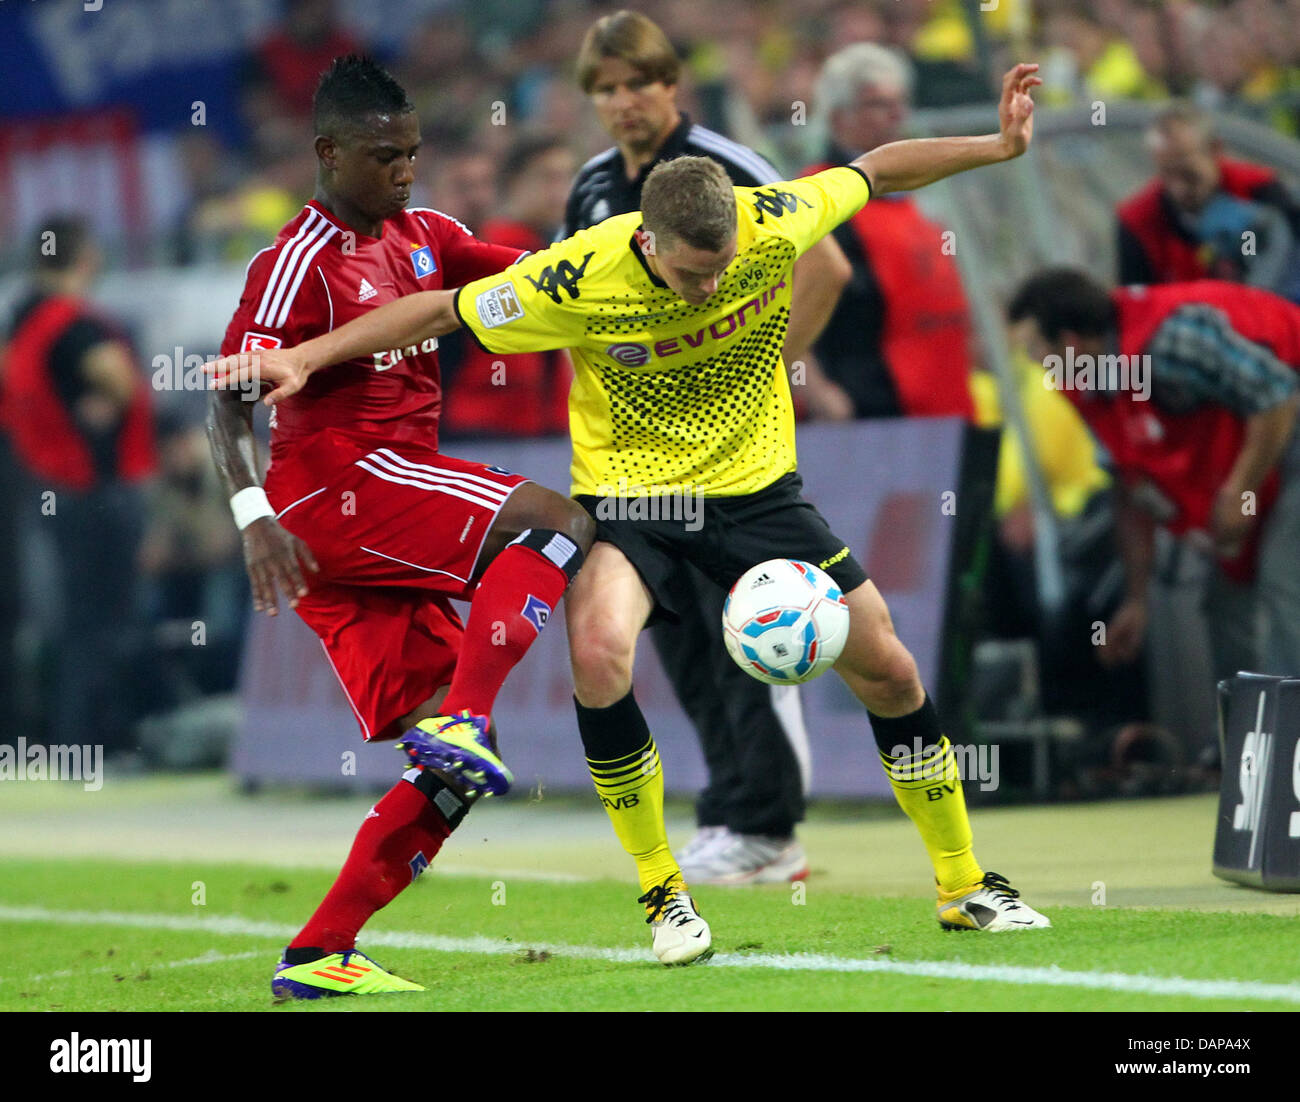 Dortmund's Sven Bender (R) and Hamburg's Eljero Elia (R) vie for the ball during the Bundesliga soccer match between Borussia Dortmund vs Hamburger SV at the Signal-Iduna Park in Dortmund stadium in Dortmund, Germany, 5 August 2011. Photo: Jonas Güttler  (ATTENTION: EMBARGO CONDITIONS! The DFL permits the further utilisation of the pictures in IPTV, mobile services and other new te Stock Photo